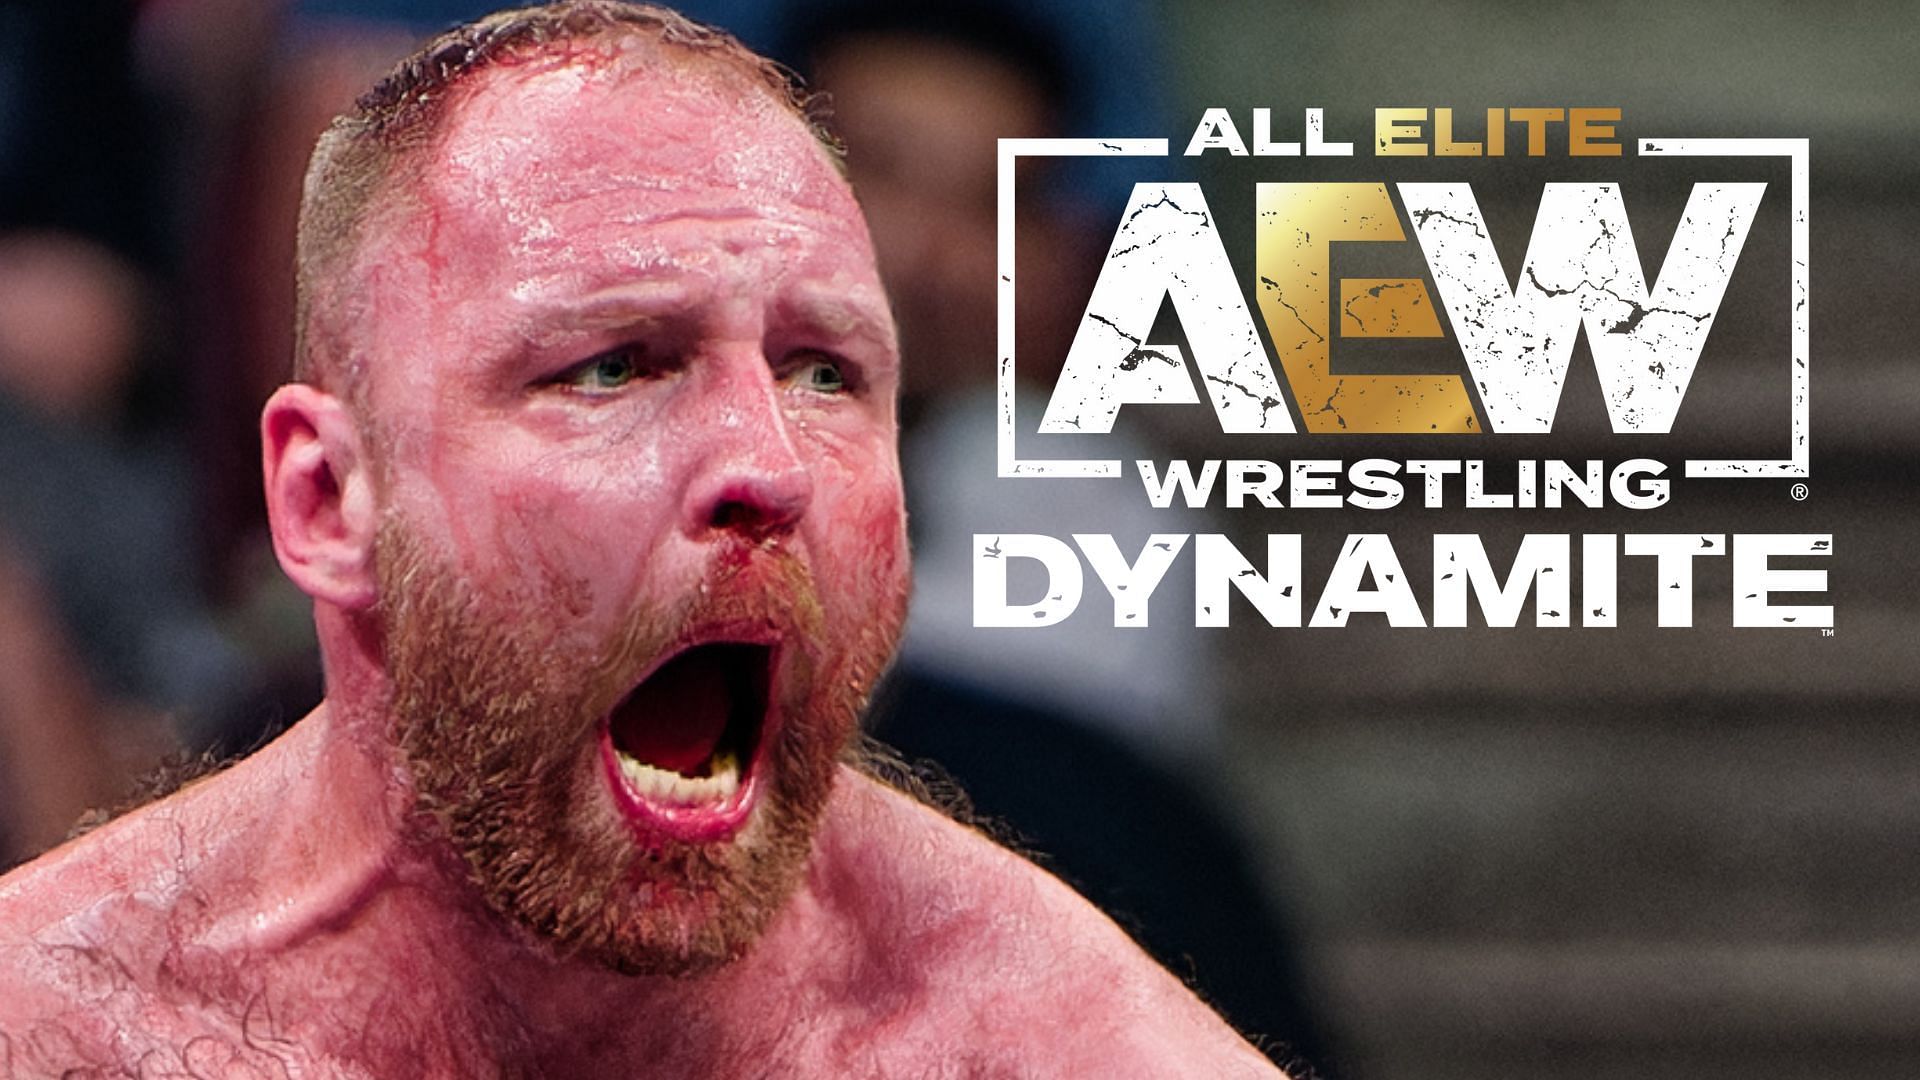 Will Jon Moxley get some assistance this week on AEW Dynamite?